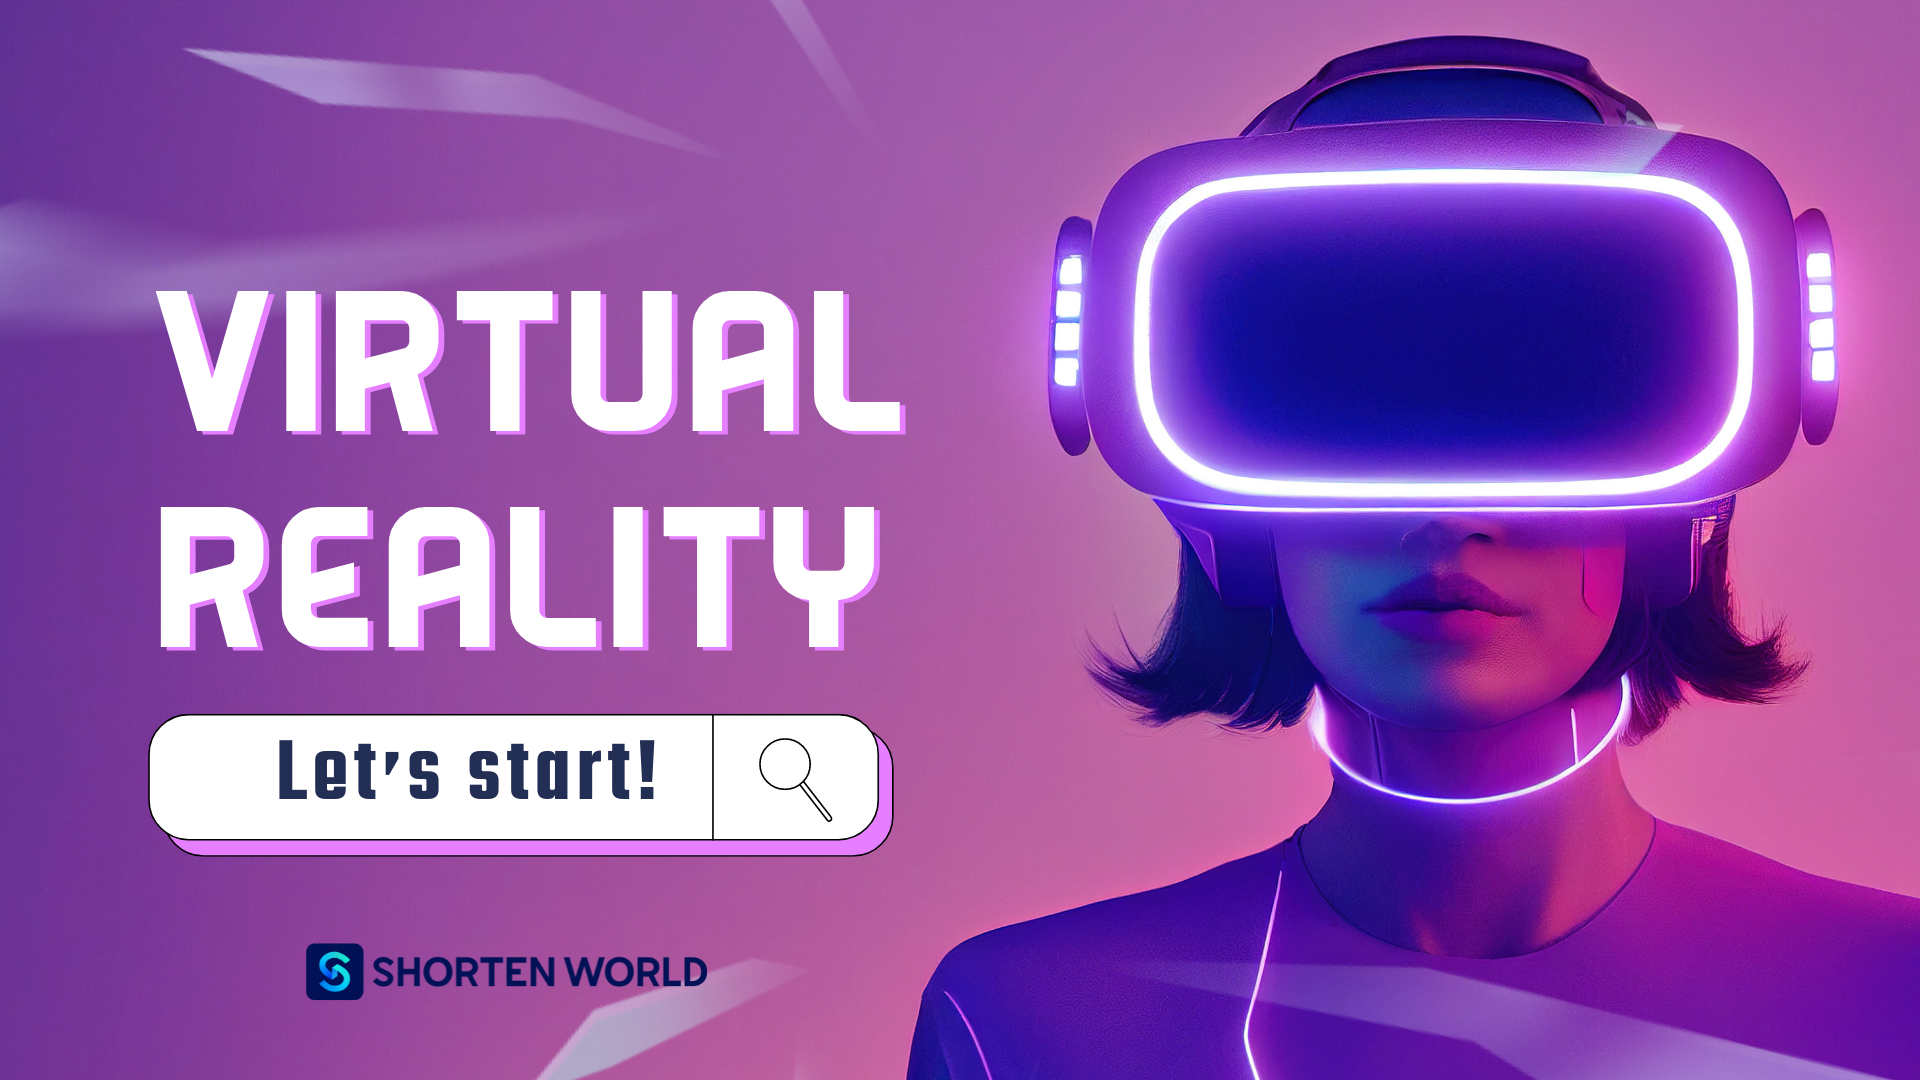 Future Trends in Auractive Marketing - Virtual Reality